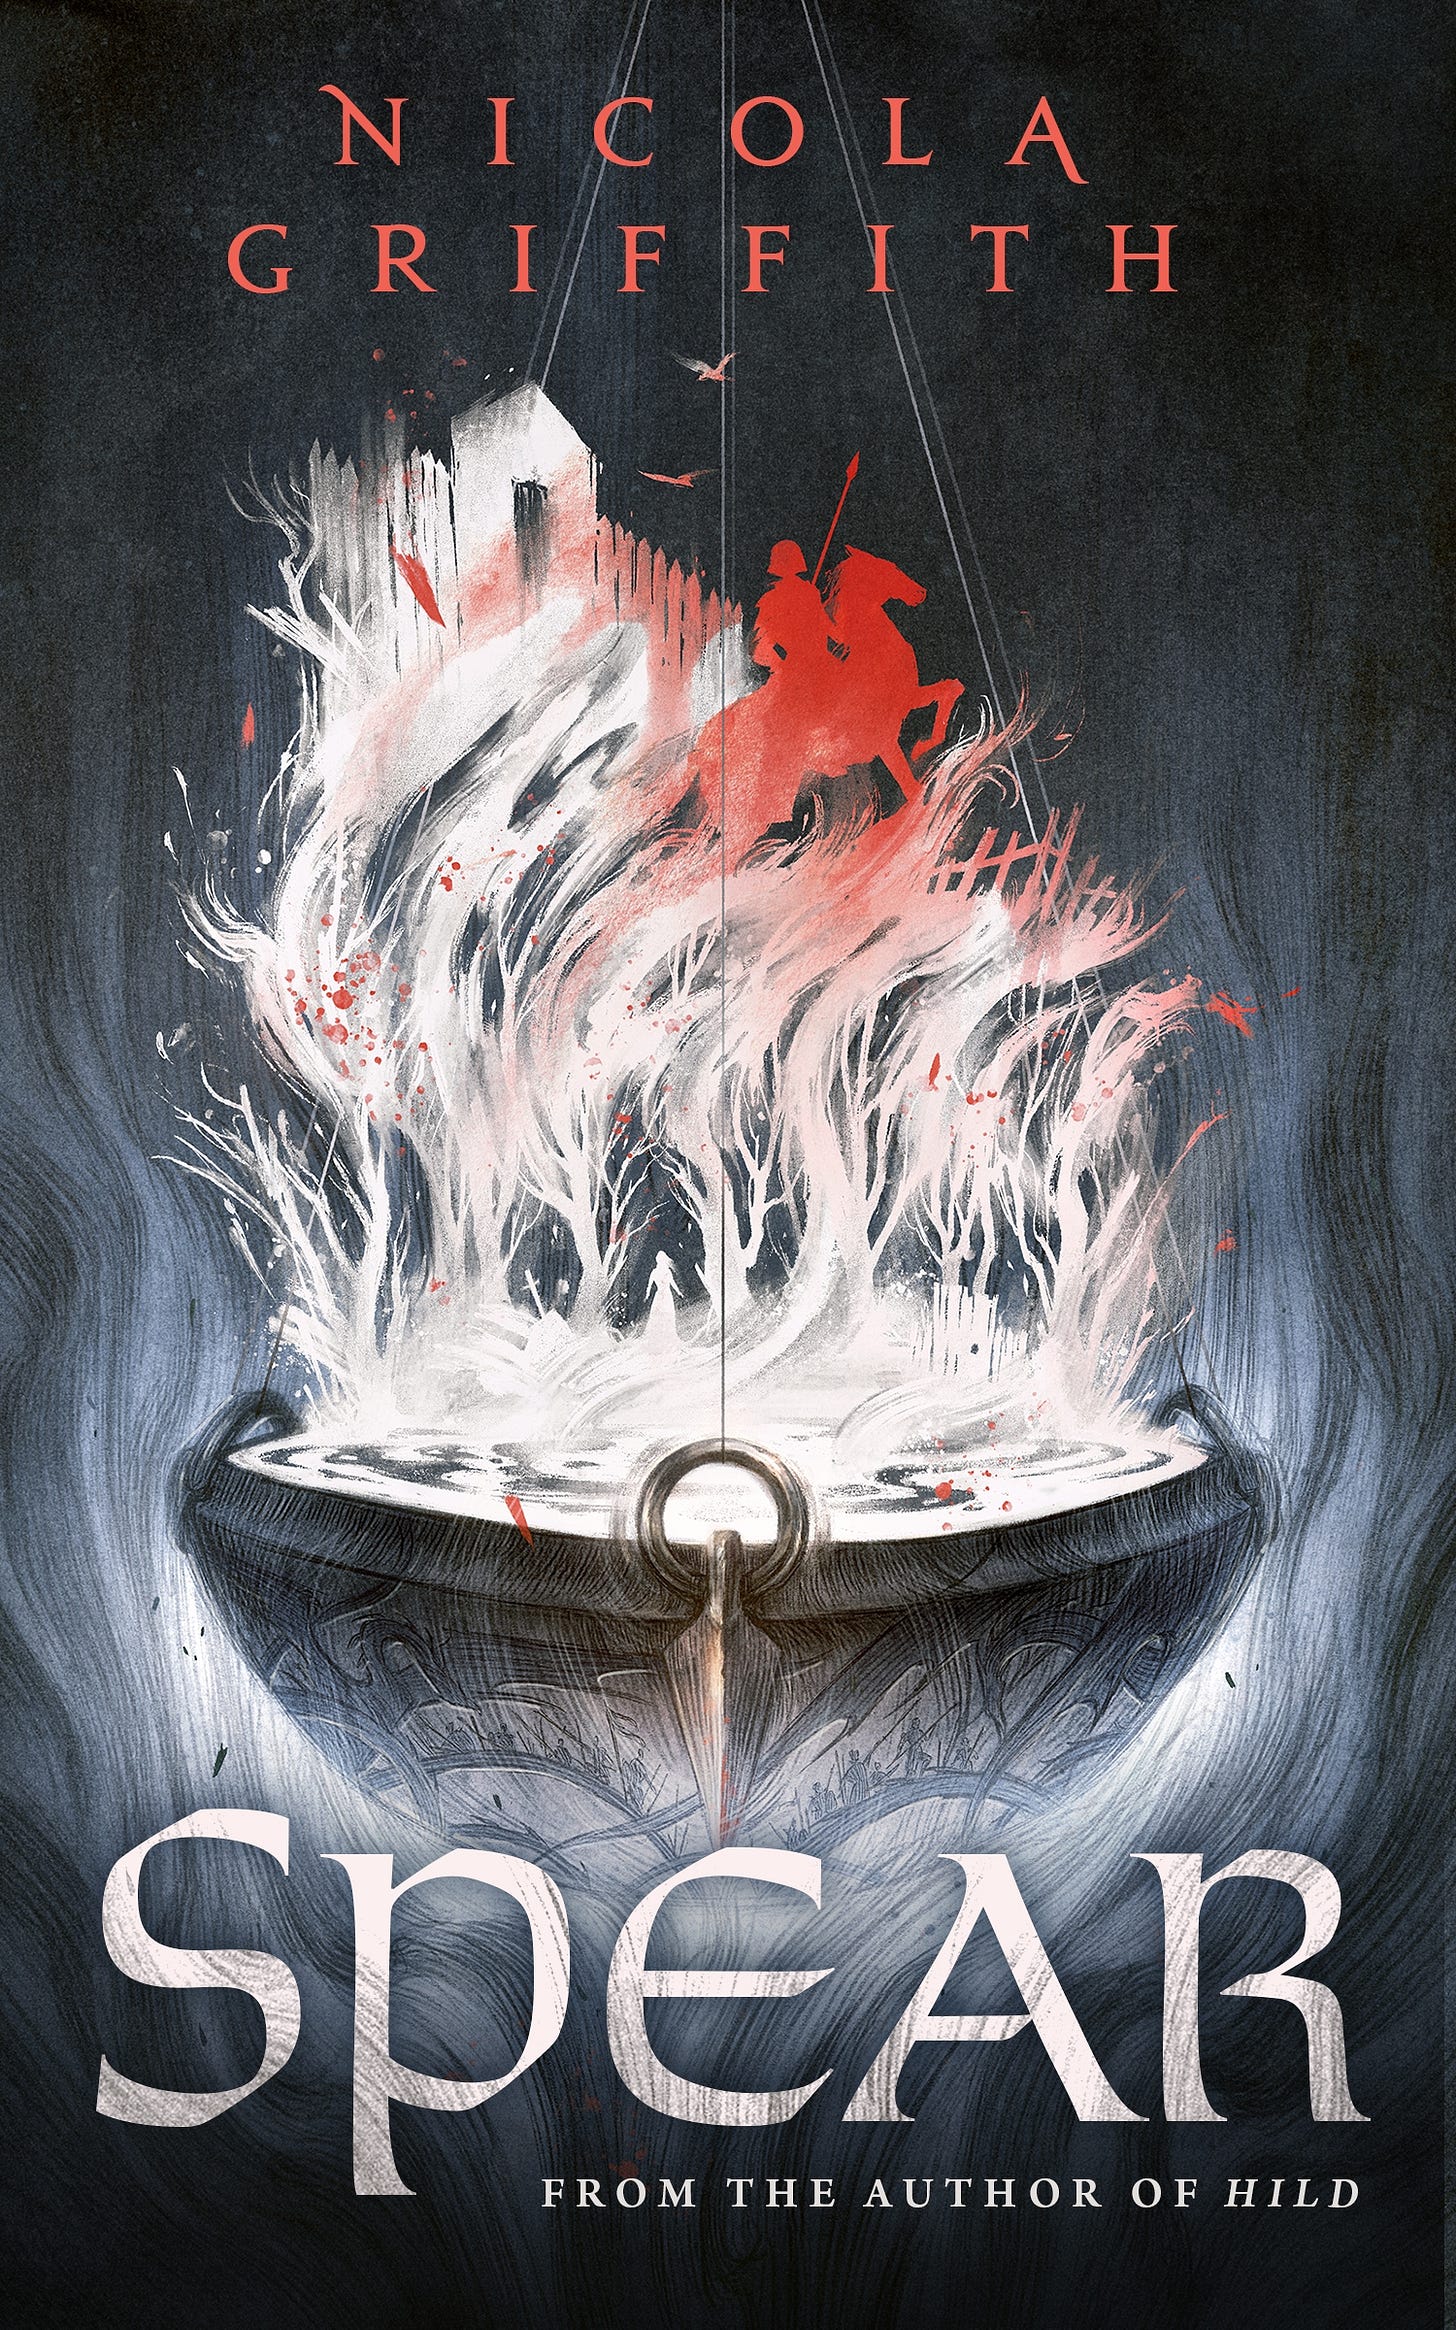 The cover of Nicola Griffith's SPEAR shows a large ornate cauldron, with round metal handles attached around it, and historic looking etchings of an army with spears/weapons facing dragon-like figures. Liquid is swirling inside which turns into magical flames bursting out, in which images from the book appear including a sword sticking up, a woman's figure in a forest, the book's main character Peretur on horseback holding a spear, a castle/barricade, fencing, and two hawks flying. The text reads "Nicola Griffith" on top and "SPEAR from the author of Hild" on the bottom. Cover art by Rovina Cai; Cover Design by Christine Foltzer.